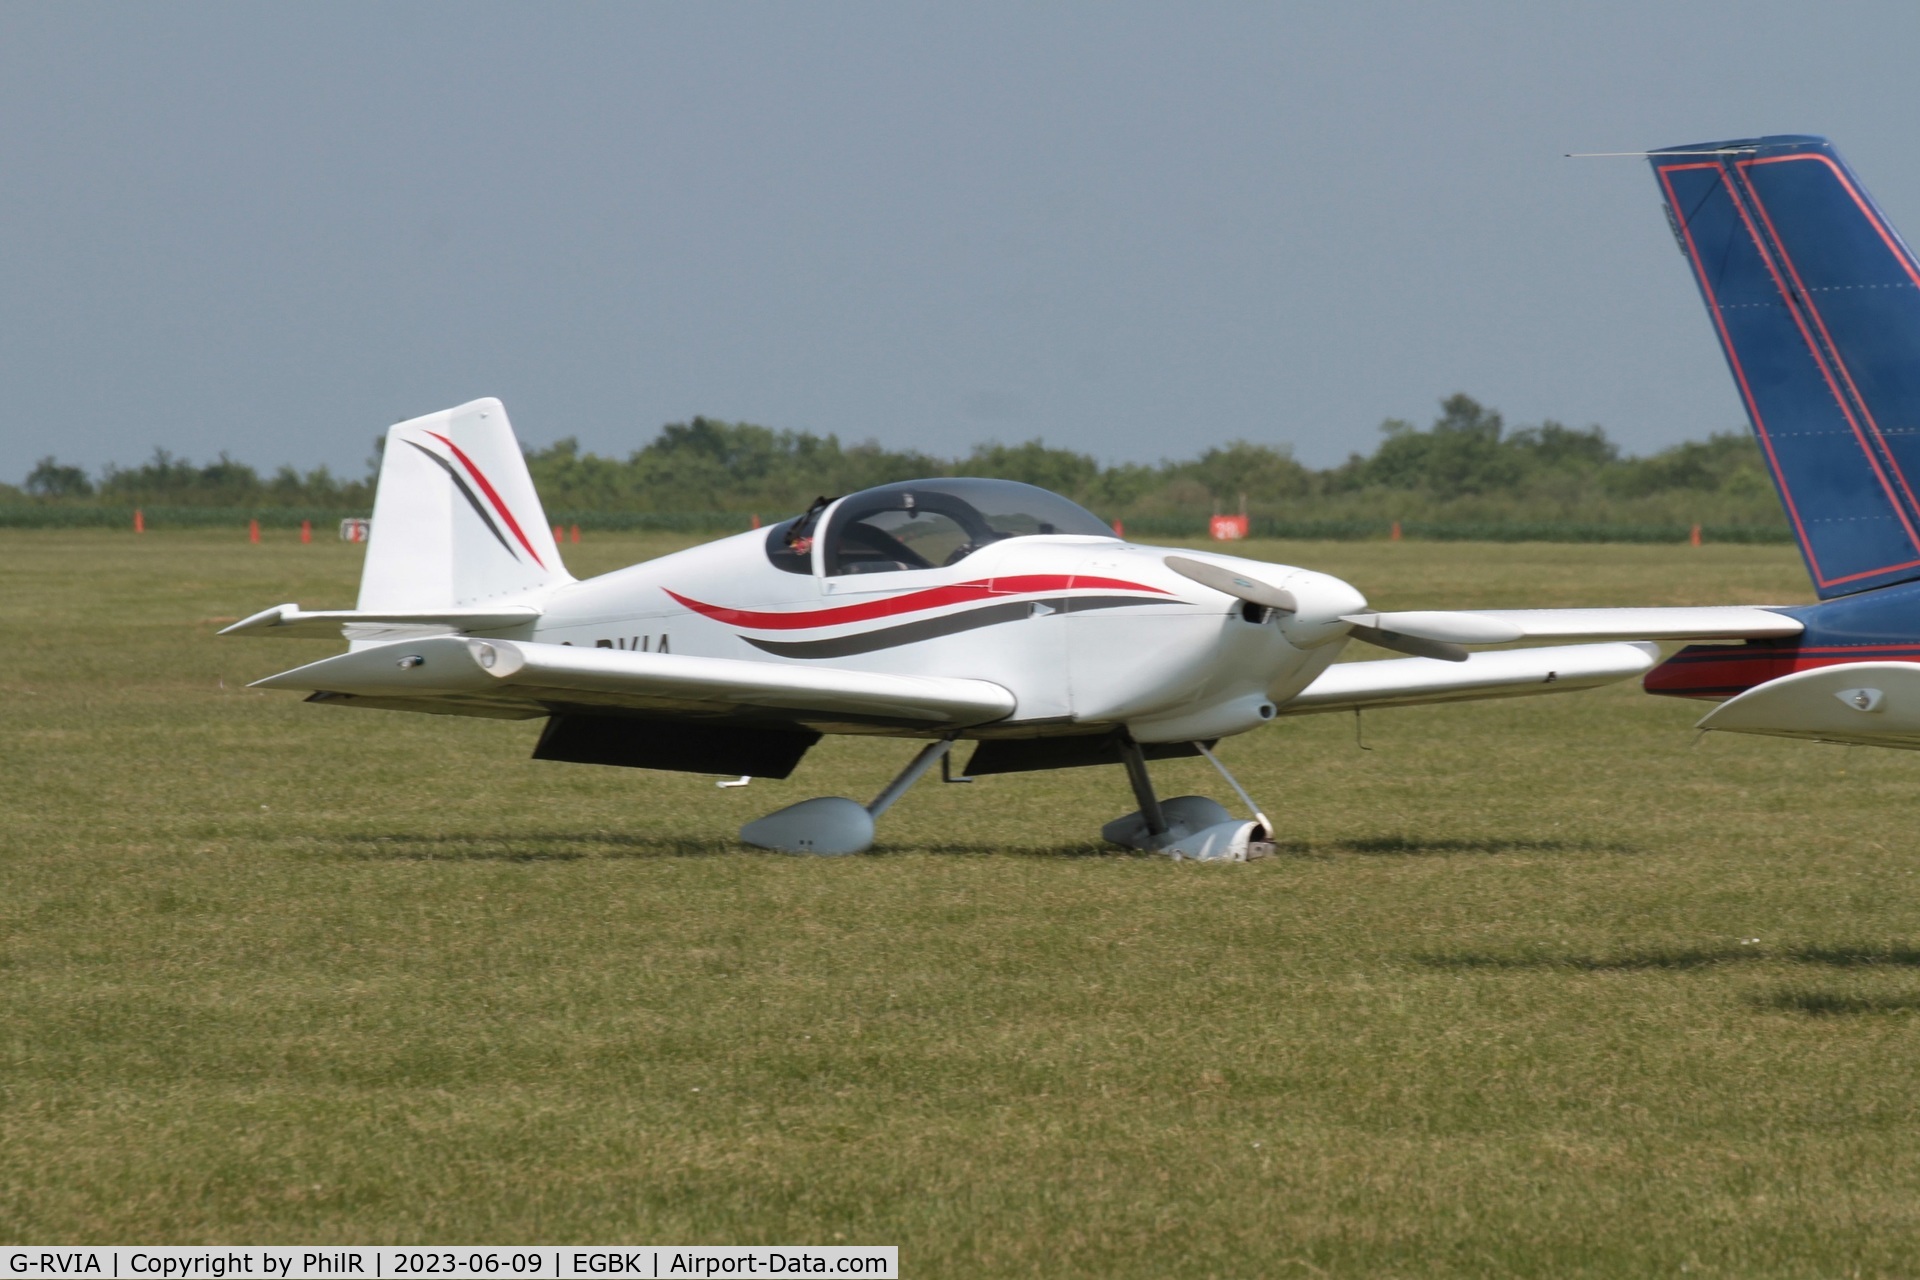 G-RVIA, 1998 Vans RV-6A C/N PFA 181-12289, G-RVIA 1998 Vans RV-6A AeroExpo Sywell